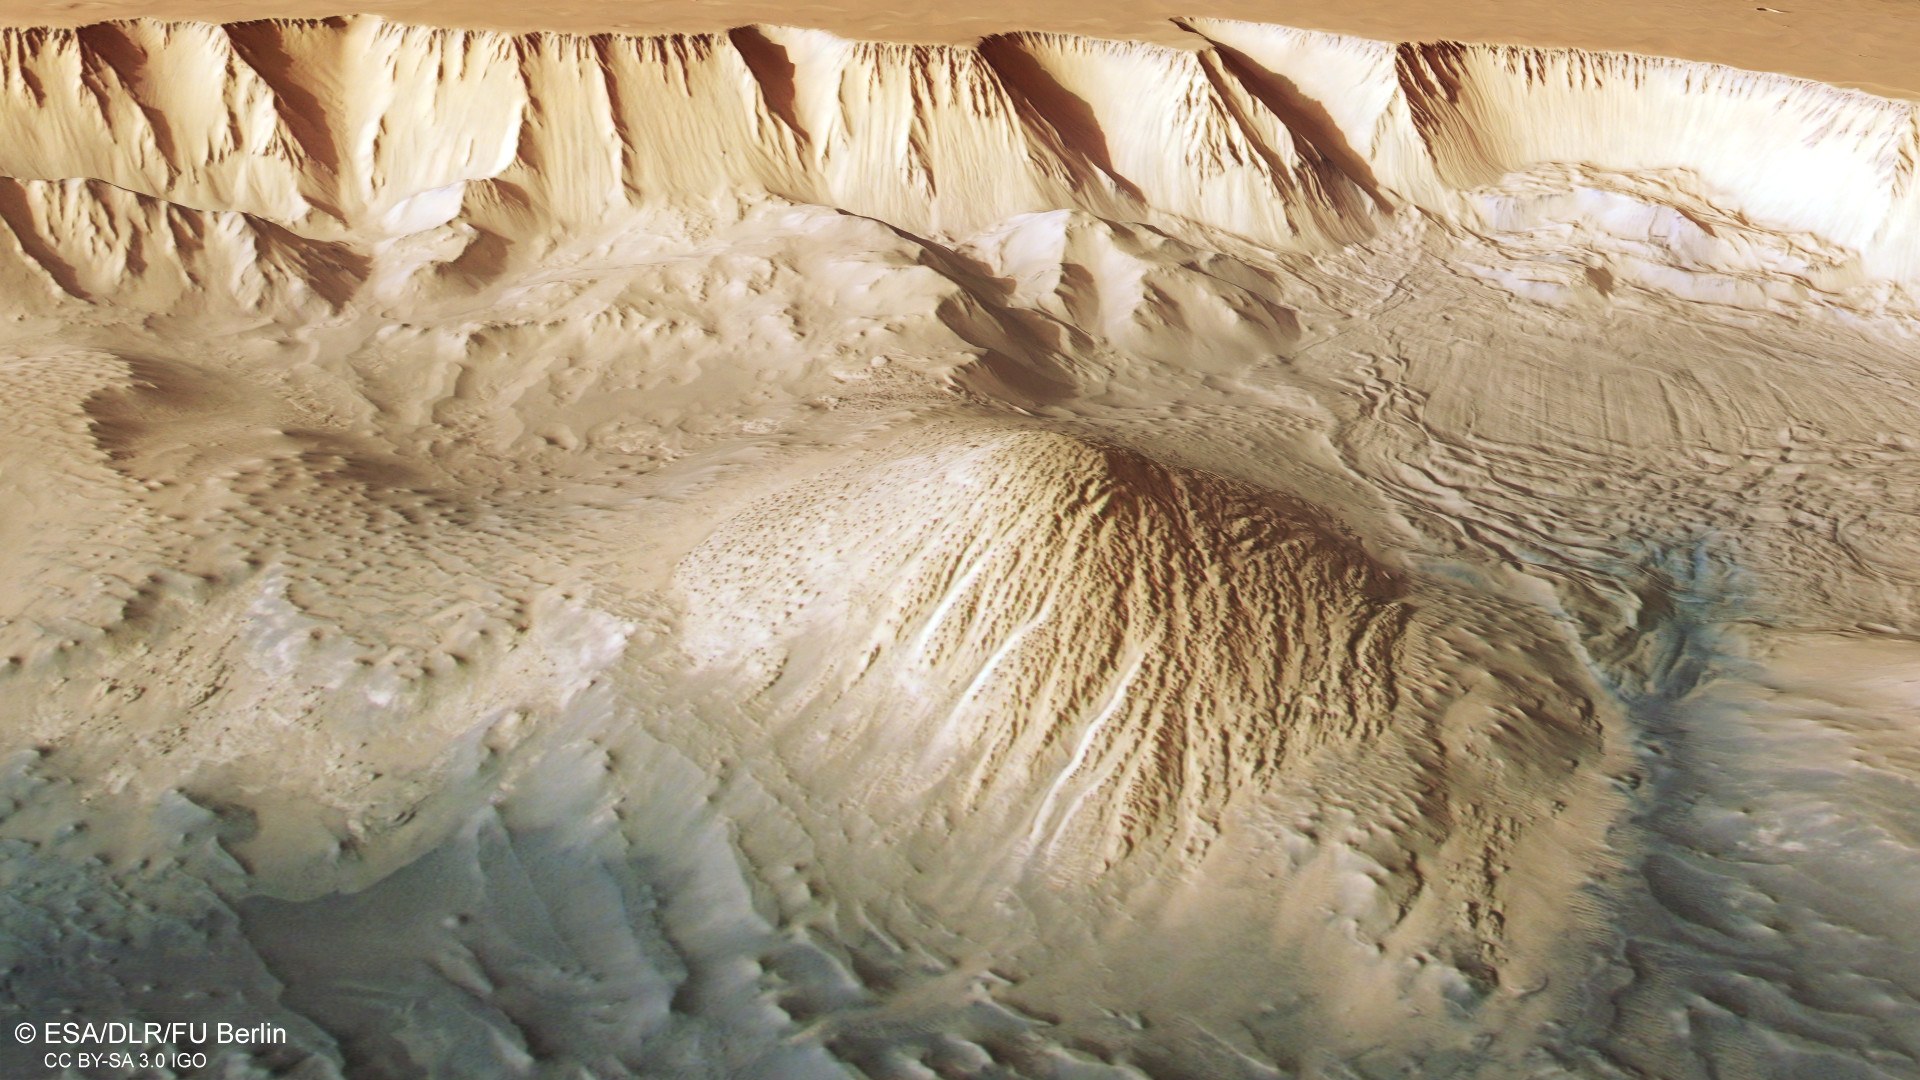 A hill approximately 3000 metres tall in Tithonium Chasma